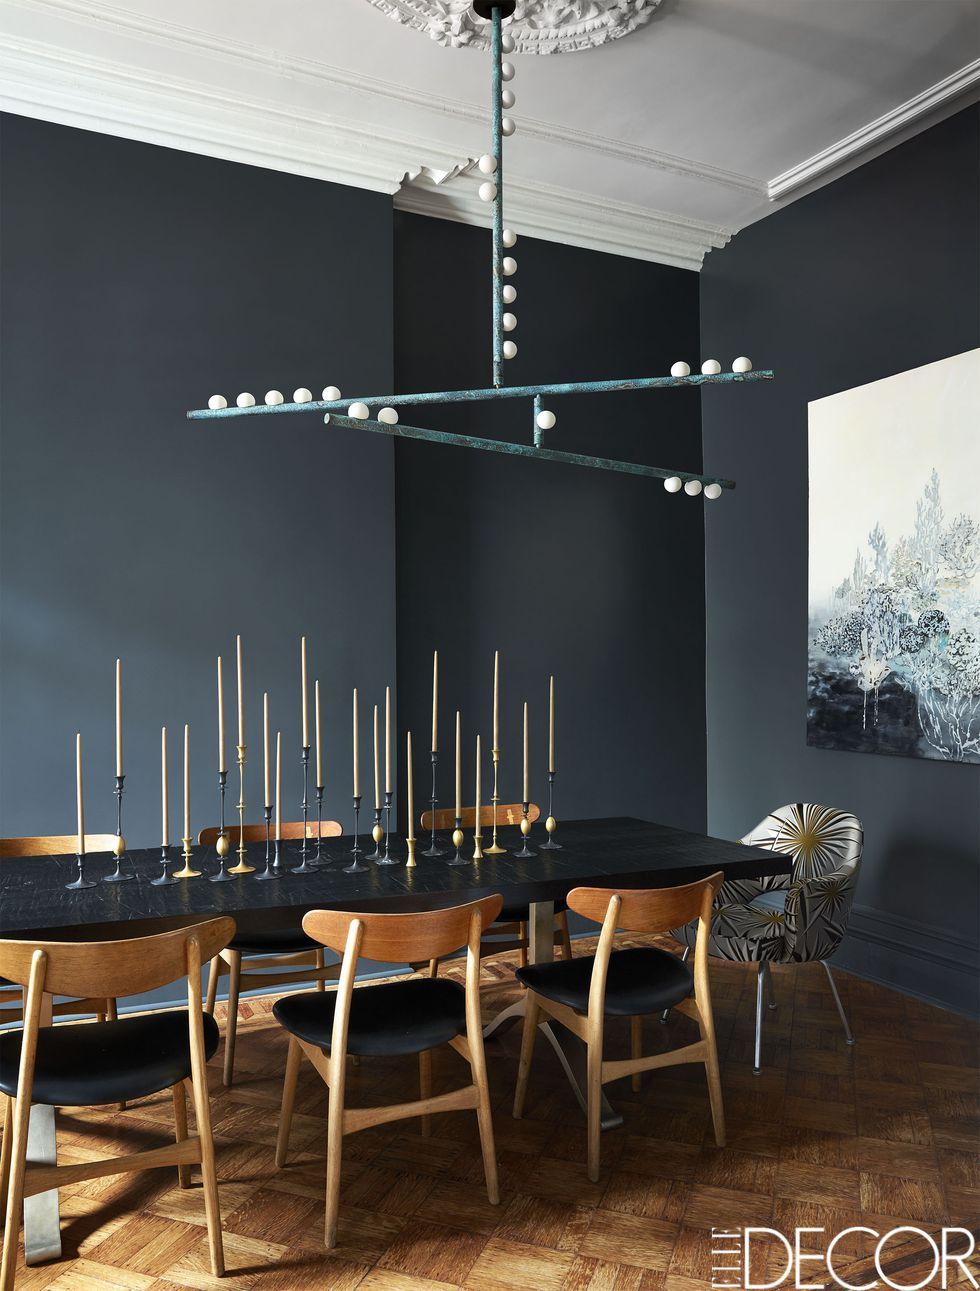 35 Black Room Decorating Ideas How To, Painting Dining Room Chairs Black